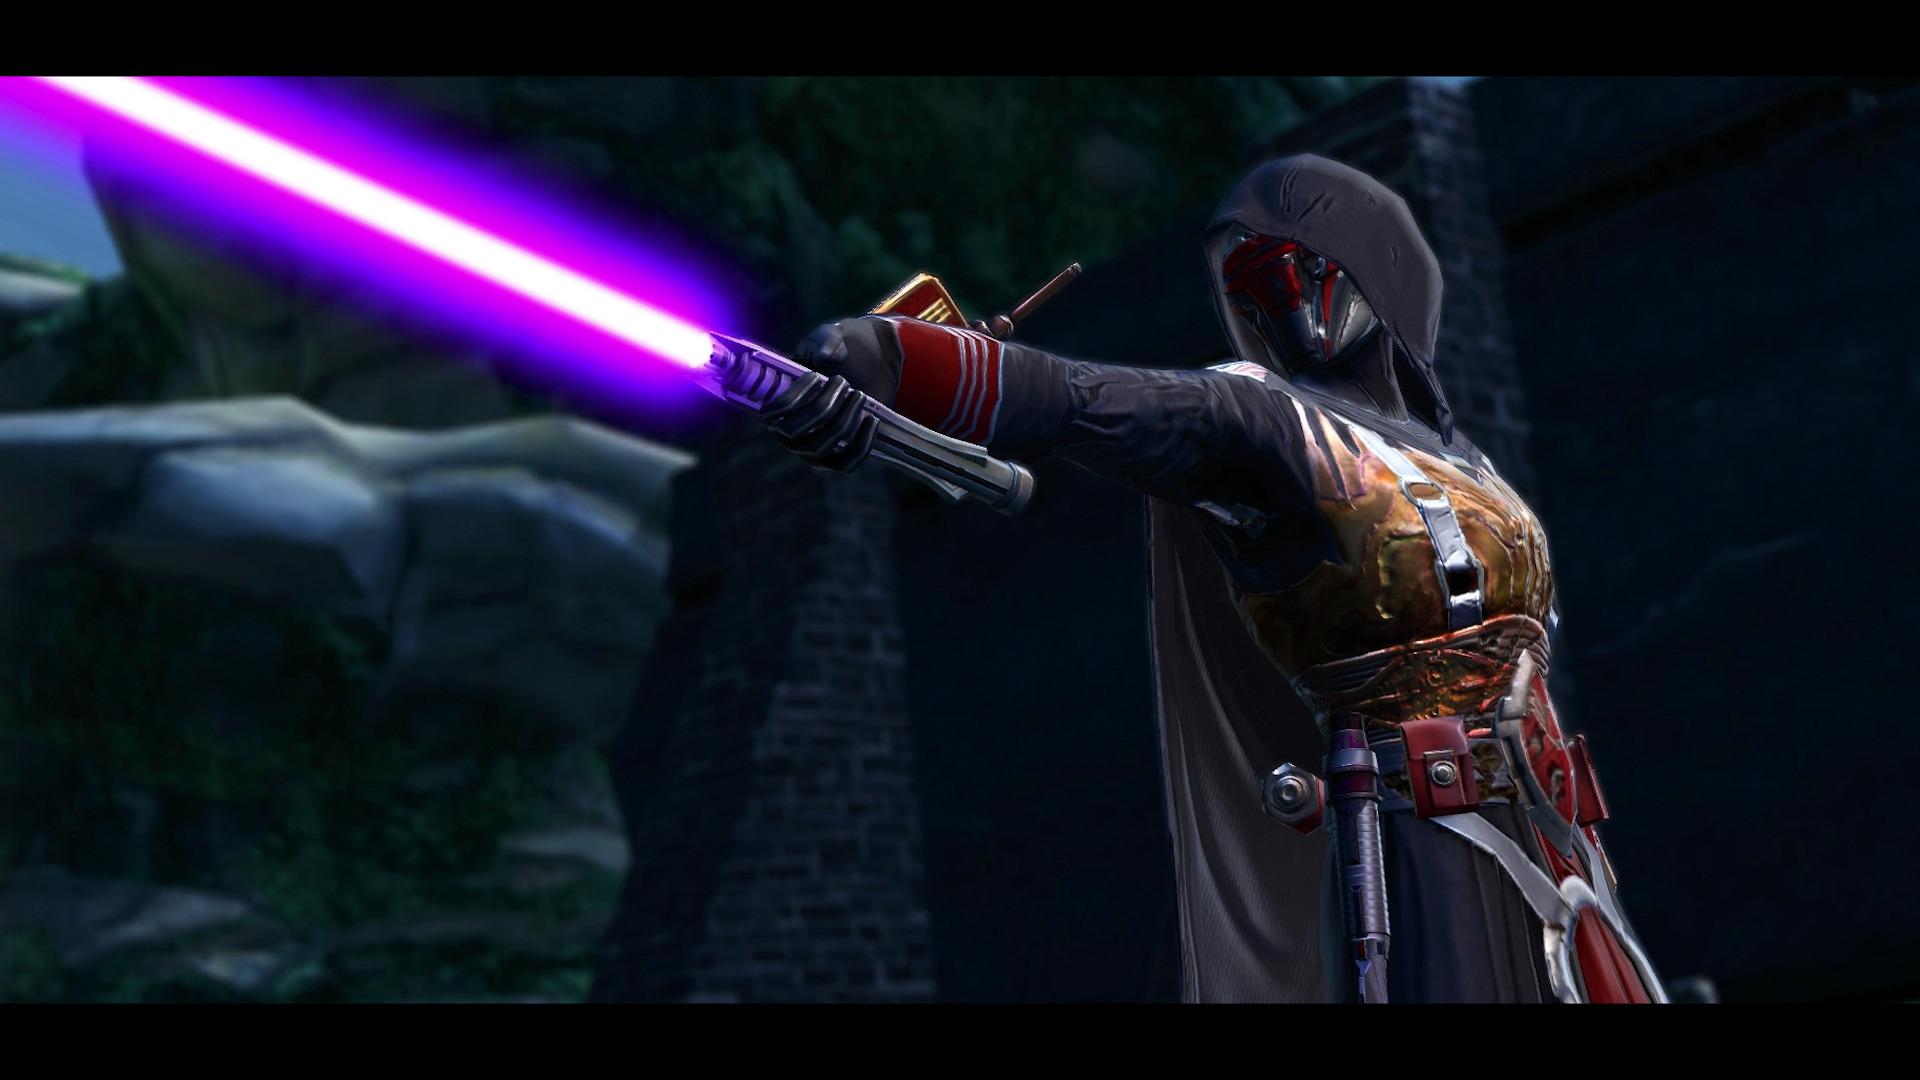 Shadow of Revan expansion brings 5 new story levels to Star Wars The